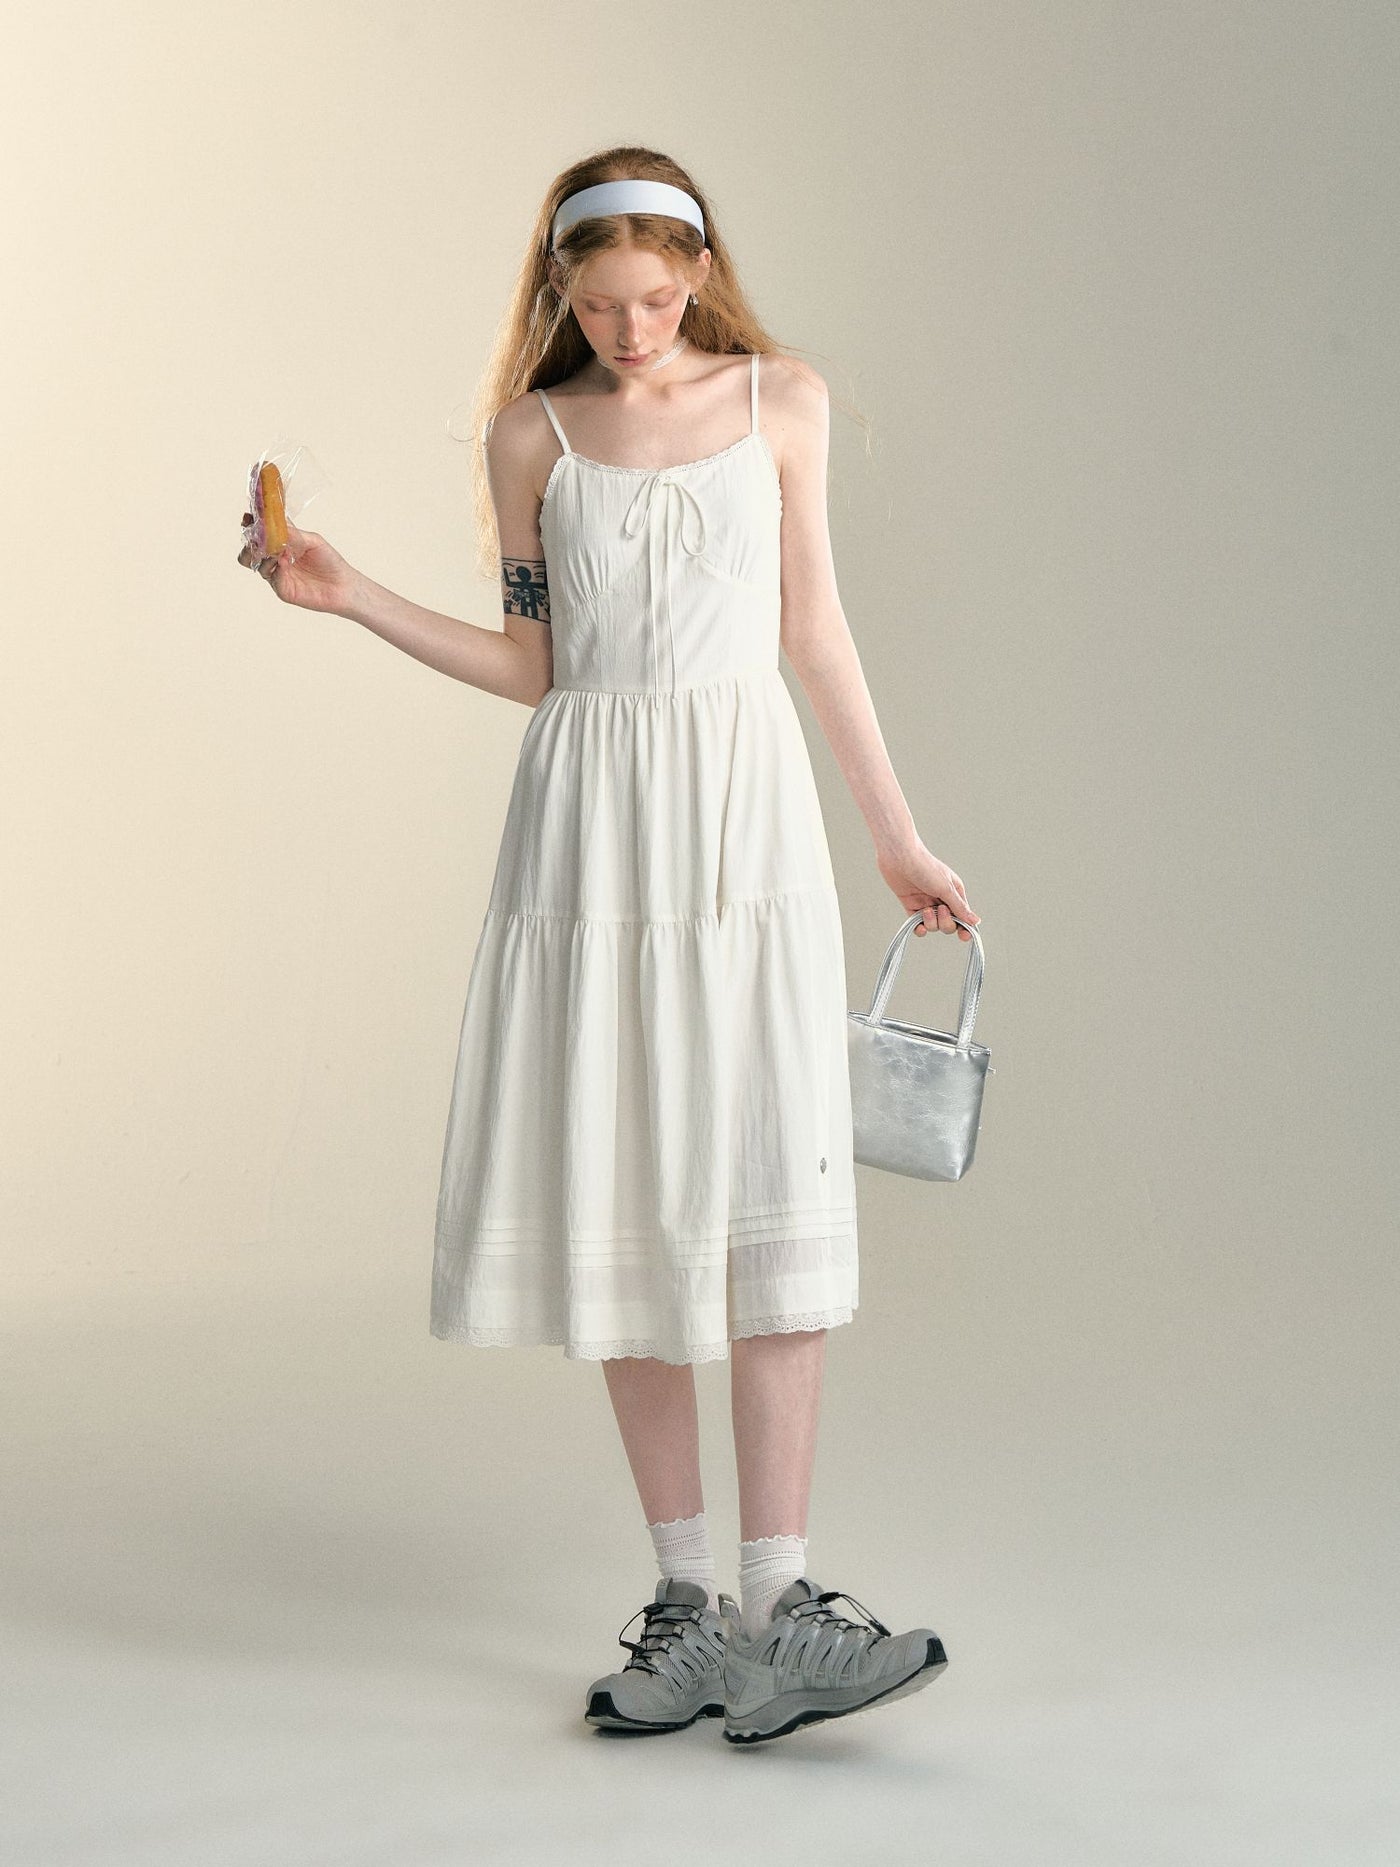 Holiday Style Lace-Up Bow White Suspender Dress SOM0019